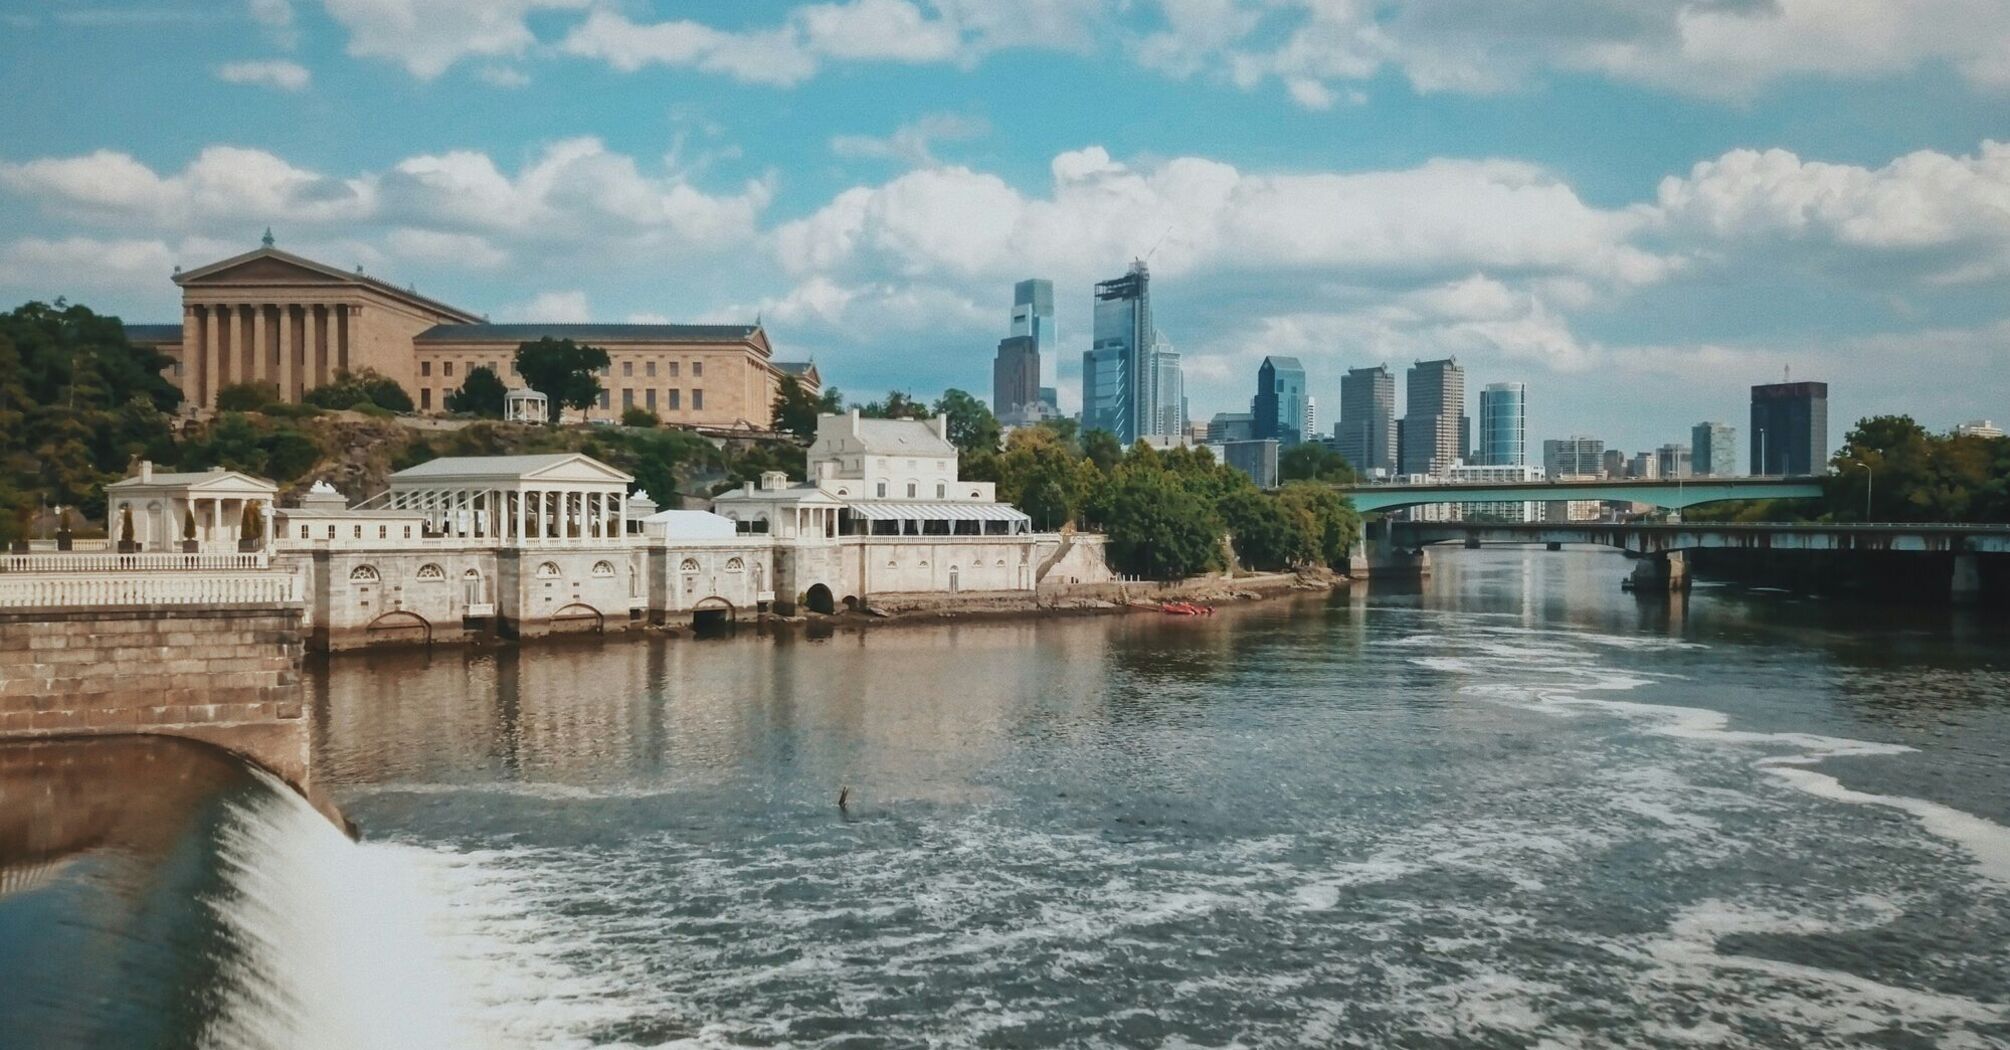 Shot along the Schuylkill River, with the Philadelphia Art Museum and the center city skyline as the backdrop